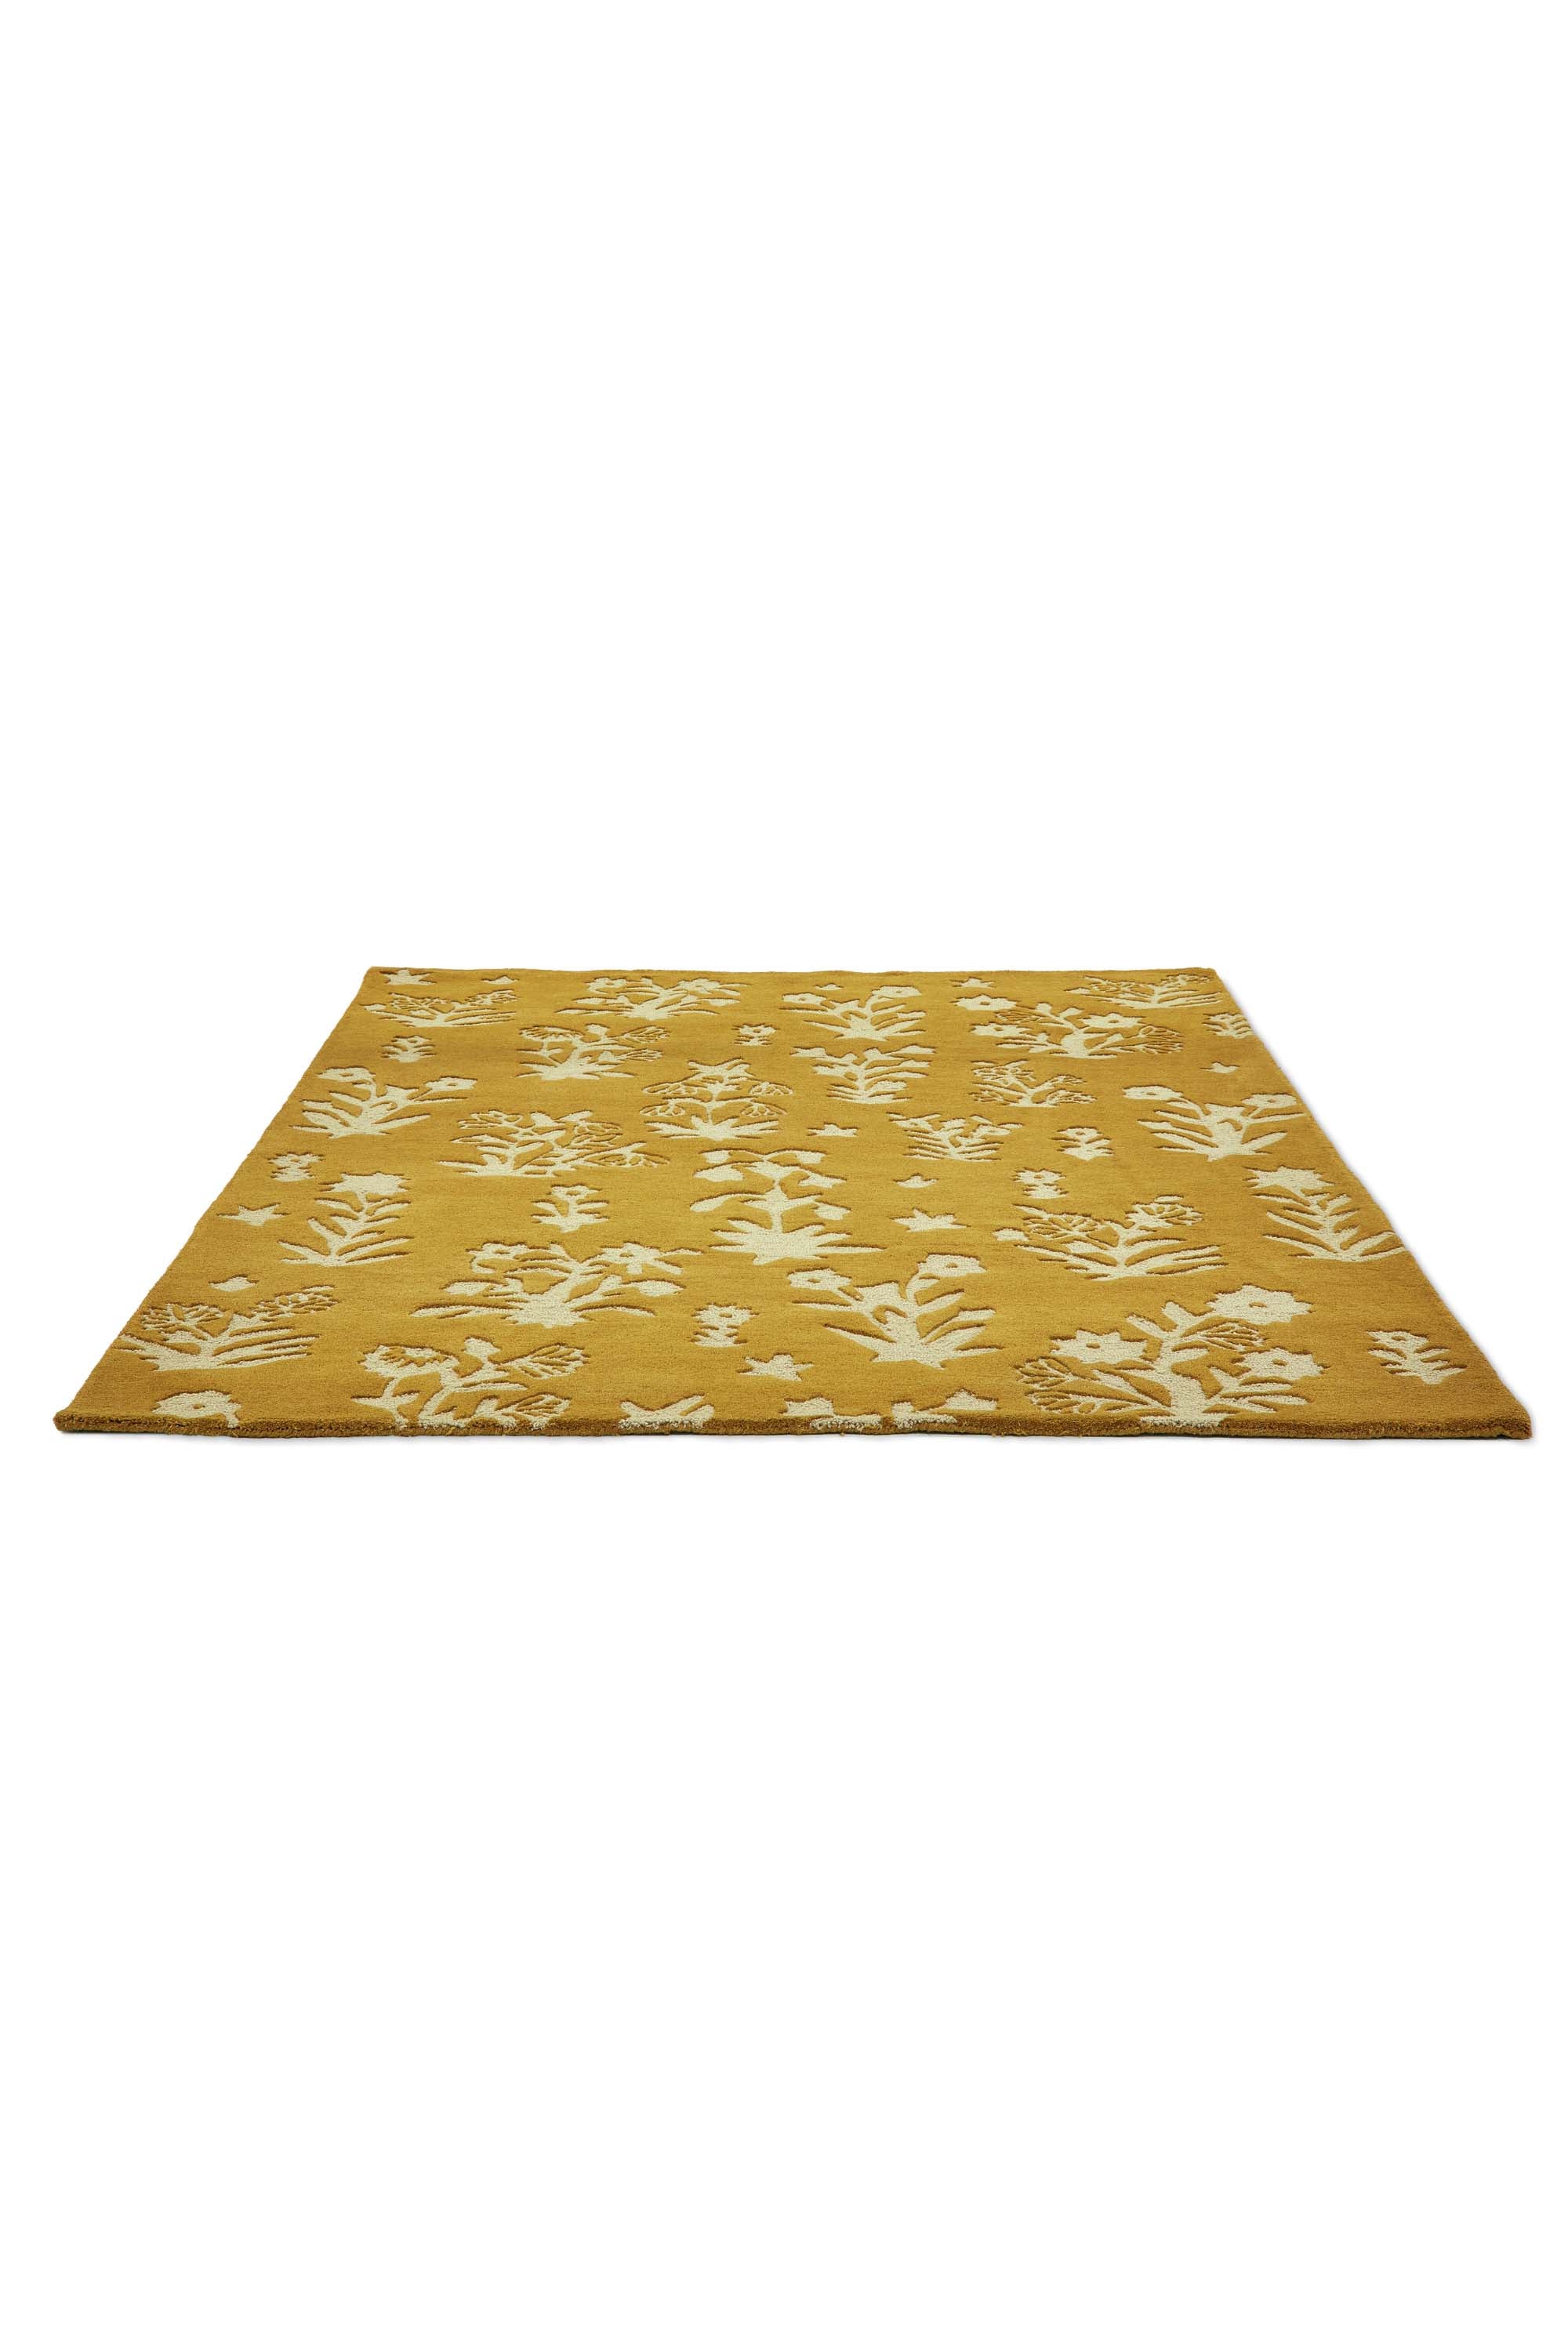 Gold rug with cream floral motif